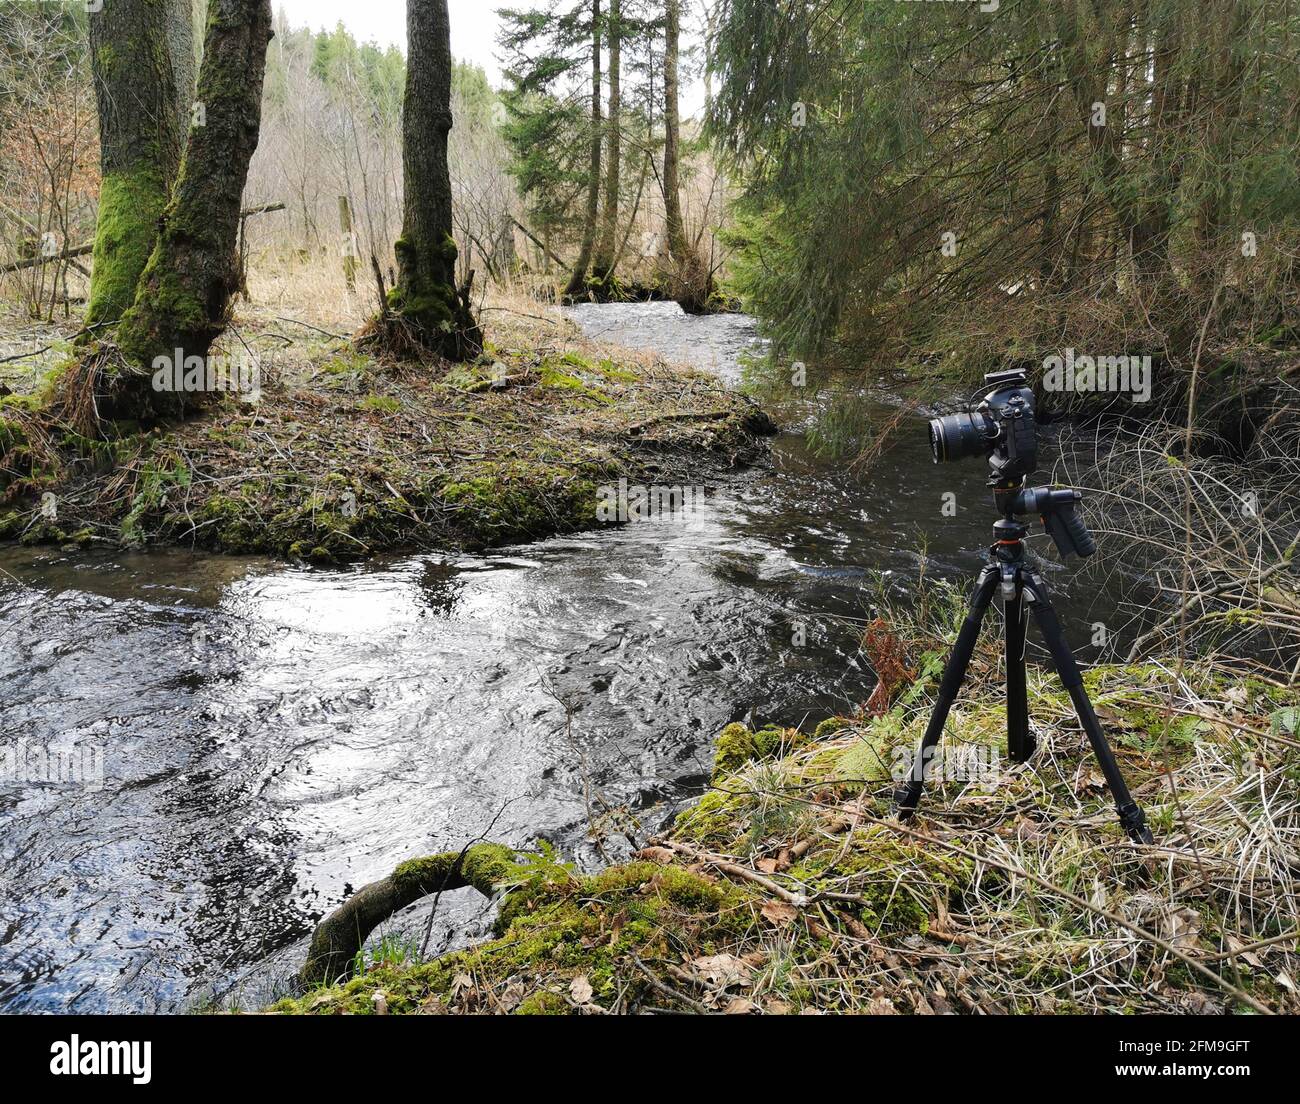 A camera tripod is standing by a river in a forest. A photo is taken, which